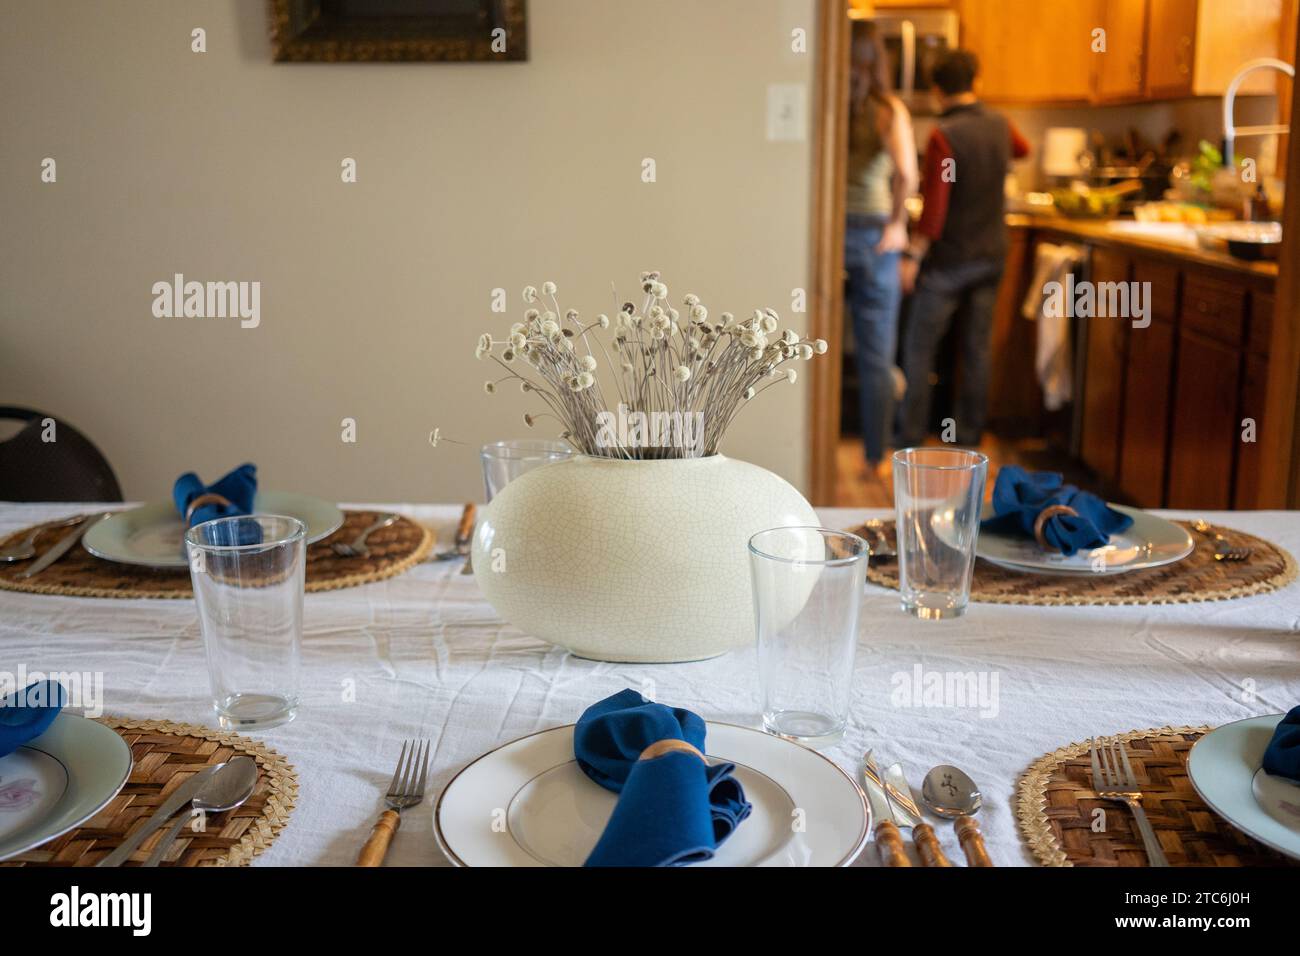 Festive blue and white table setting with a dried floral centerpiece Stock Photo